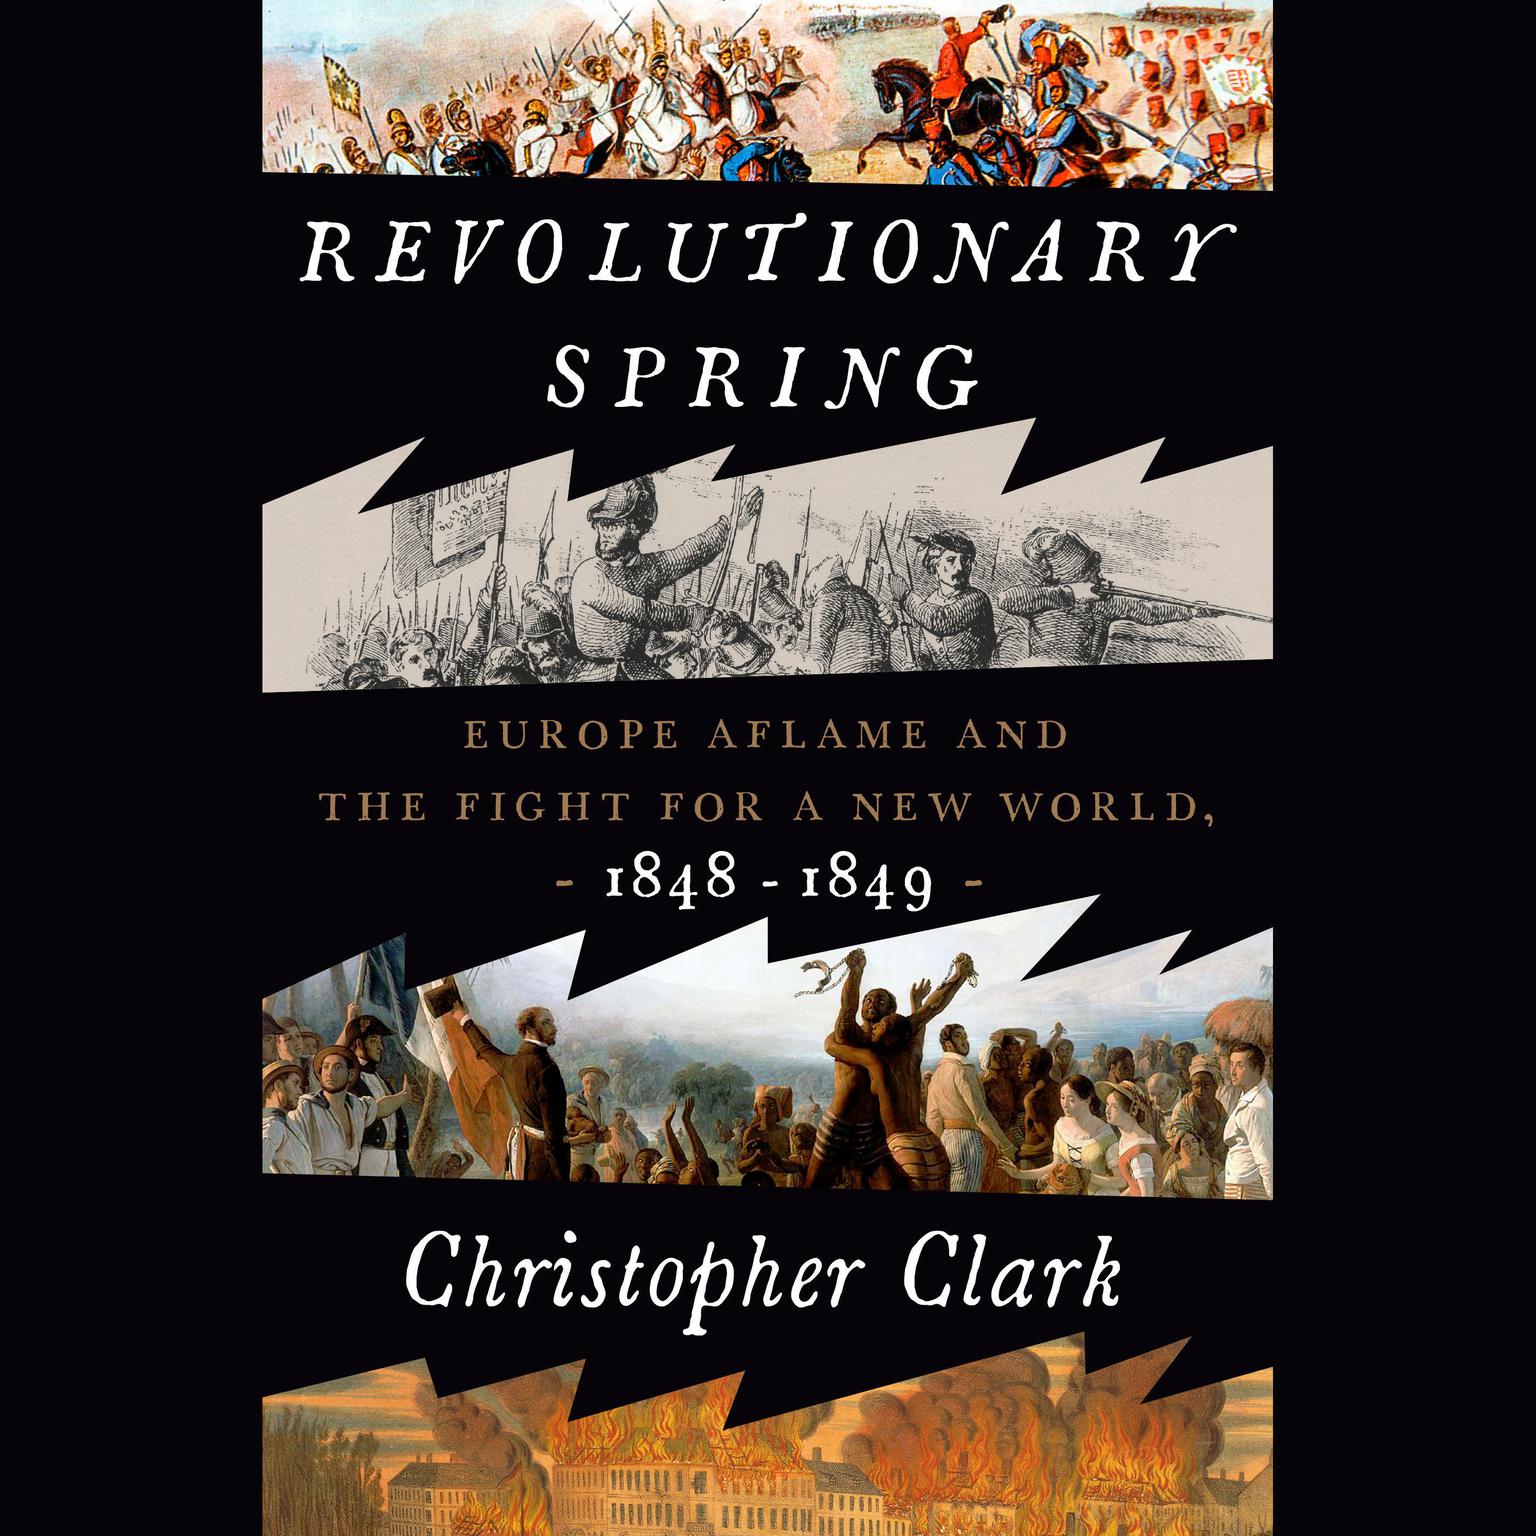 Revolutionary Spring: Europe Aflame and the Fight for a New World, 1848-1849 Audiobook, by Christopher Clark